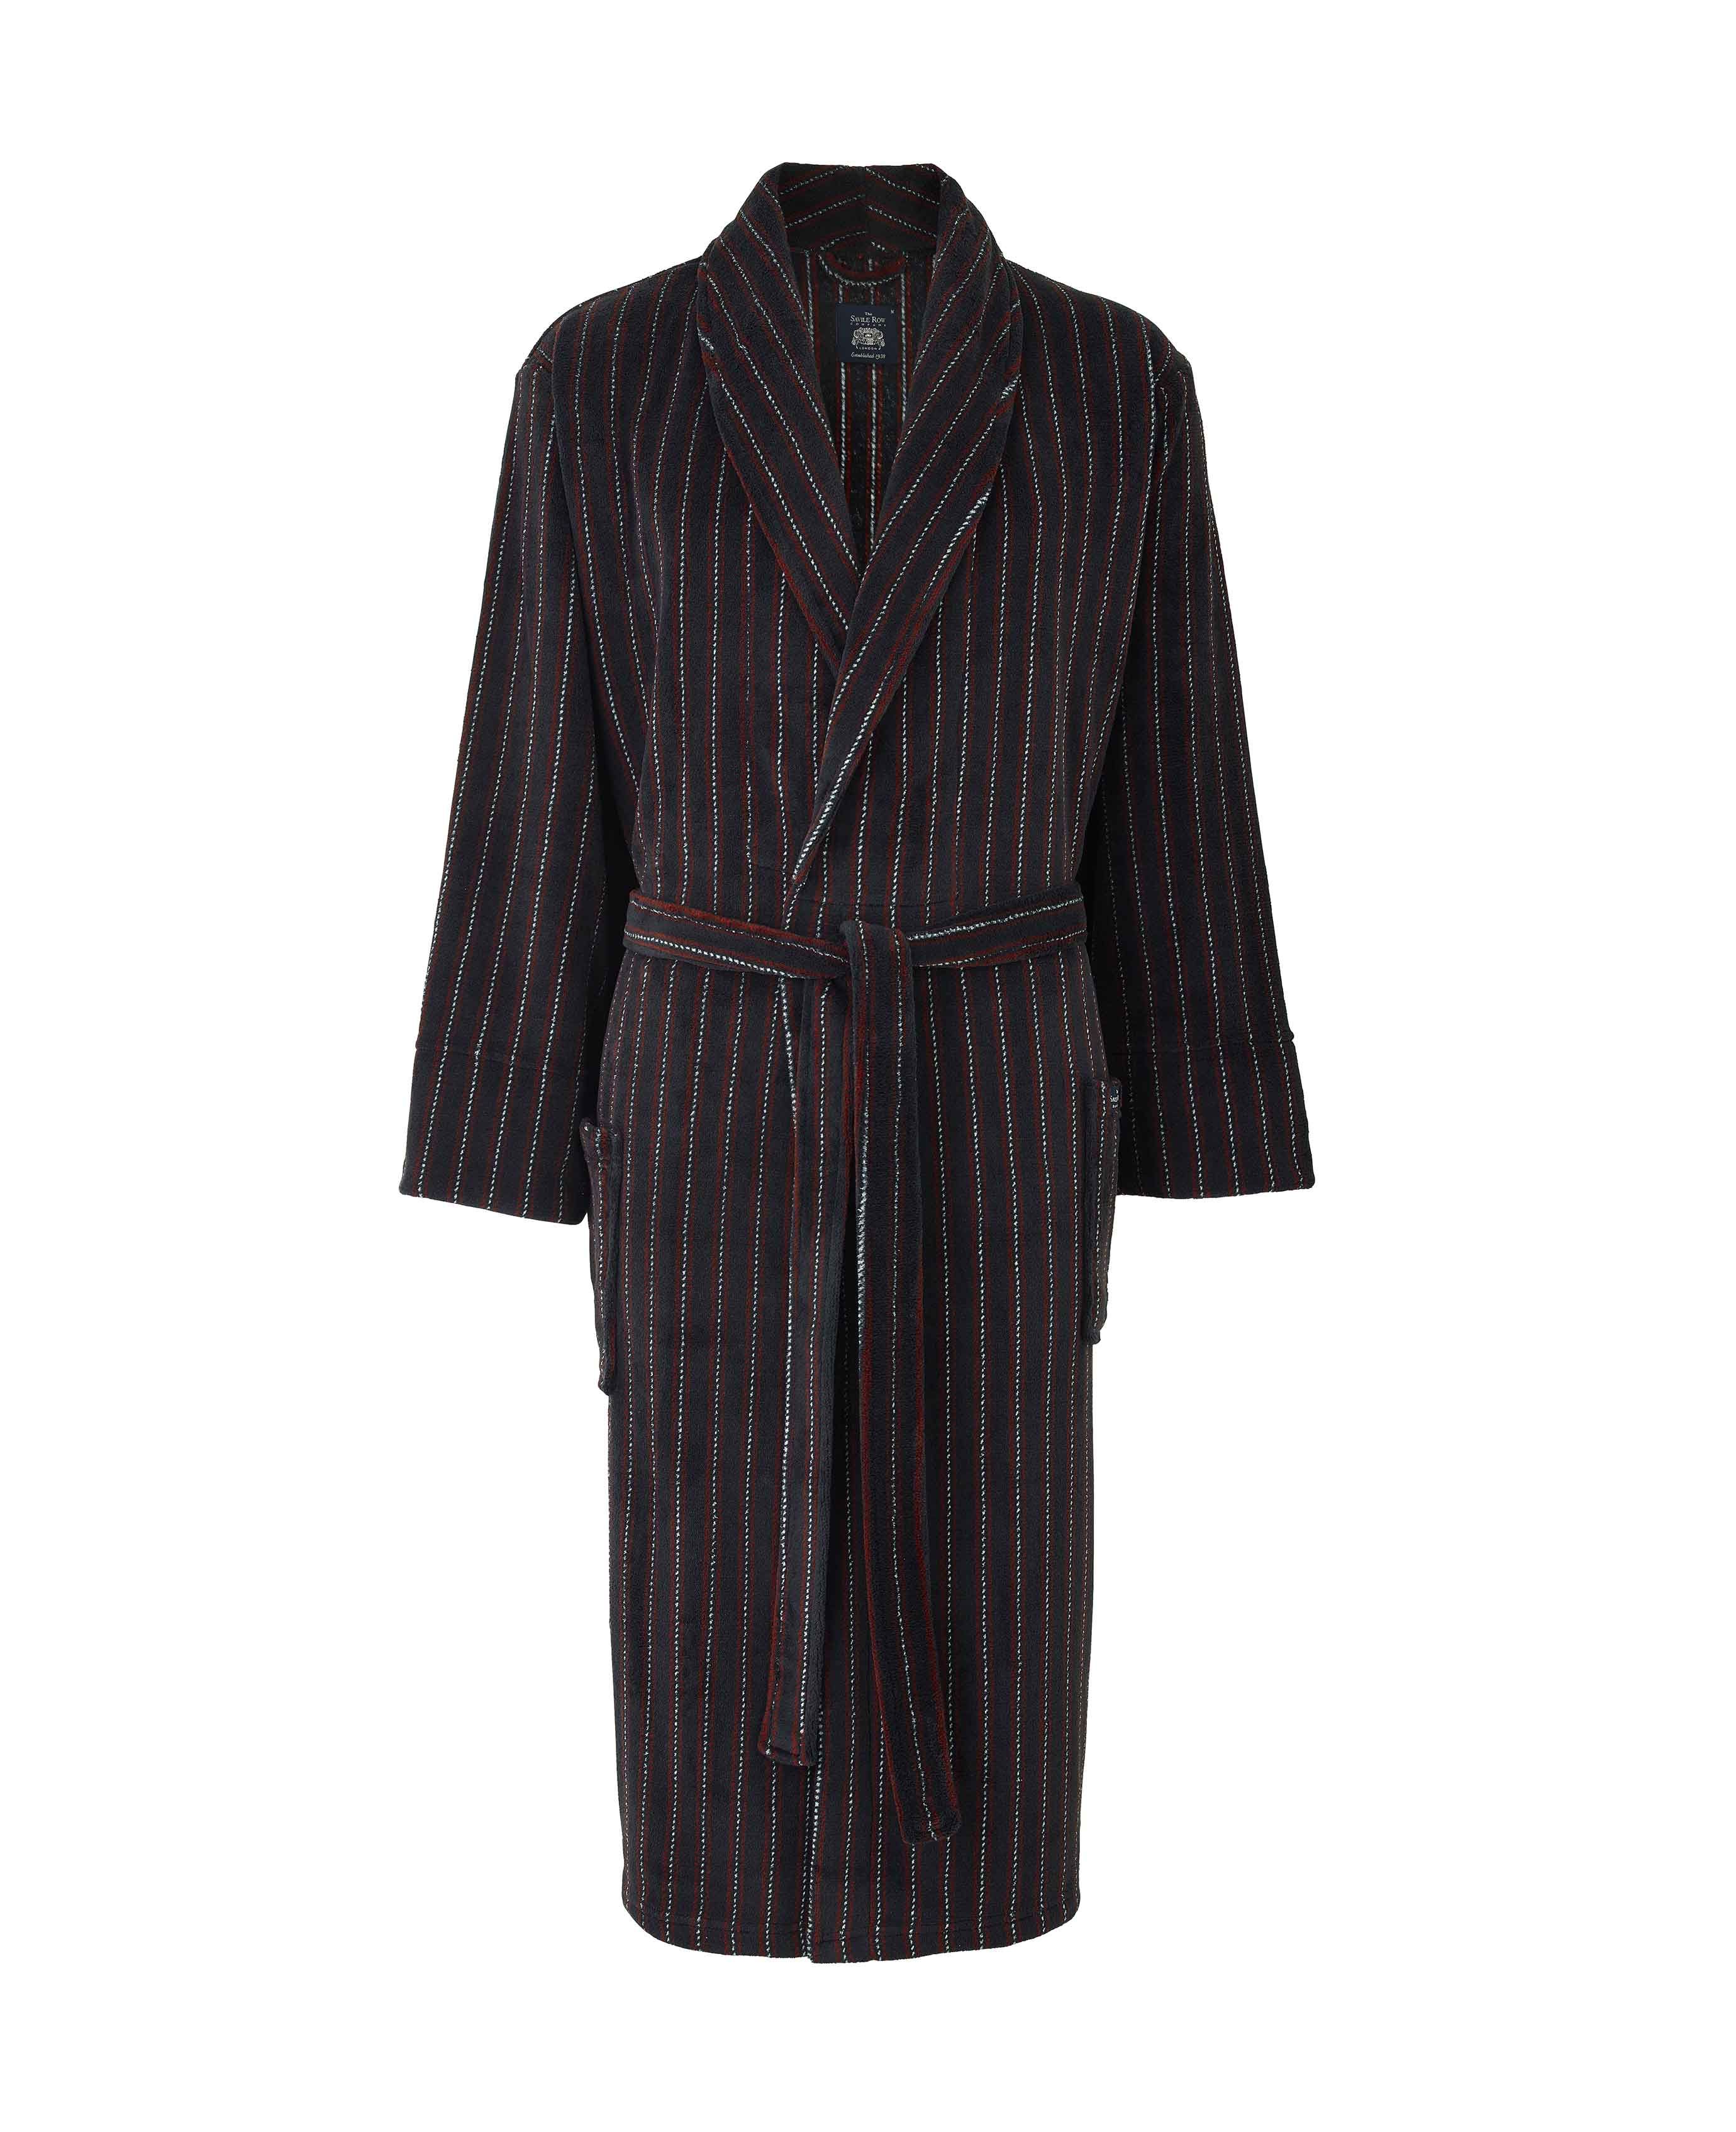 Buy 100% Cotton Unisex Dressing Gowns, Lightweight Kimono Bathrobes,  Organically Grown, Ethically Made. One Size: Fits UK 10-18 / EU 38-46  Online in India - Etsy